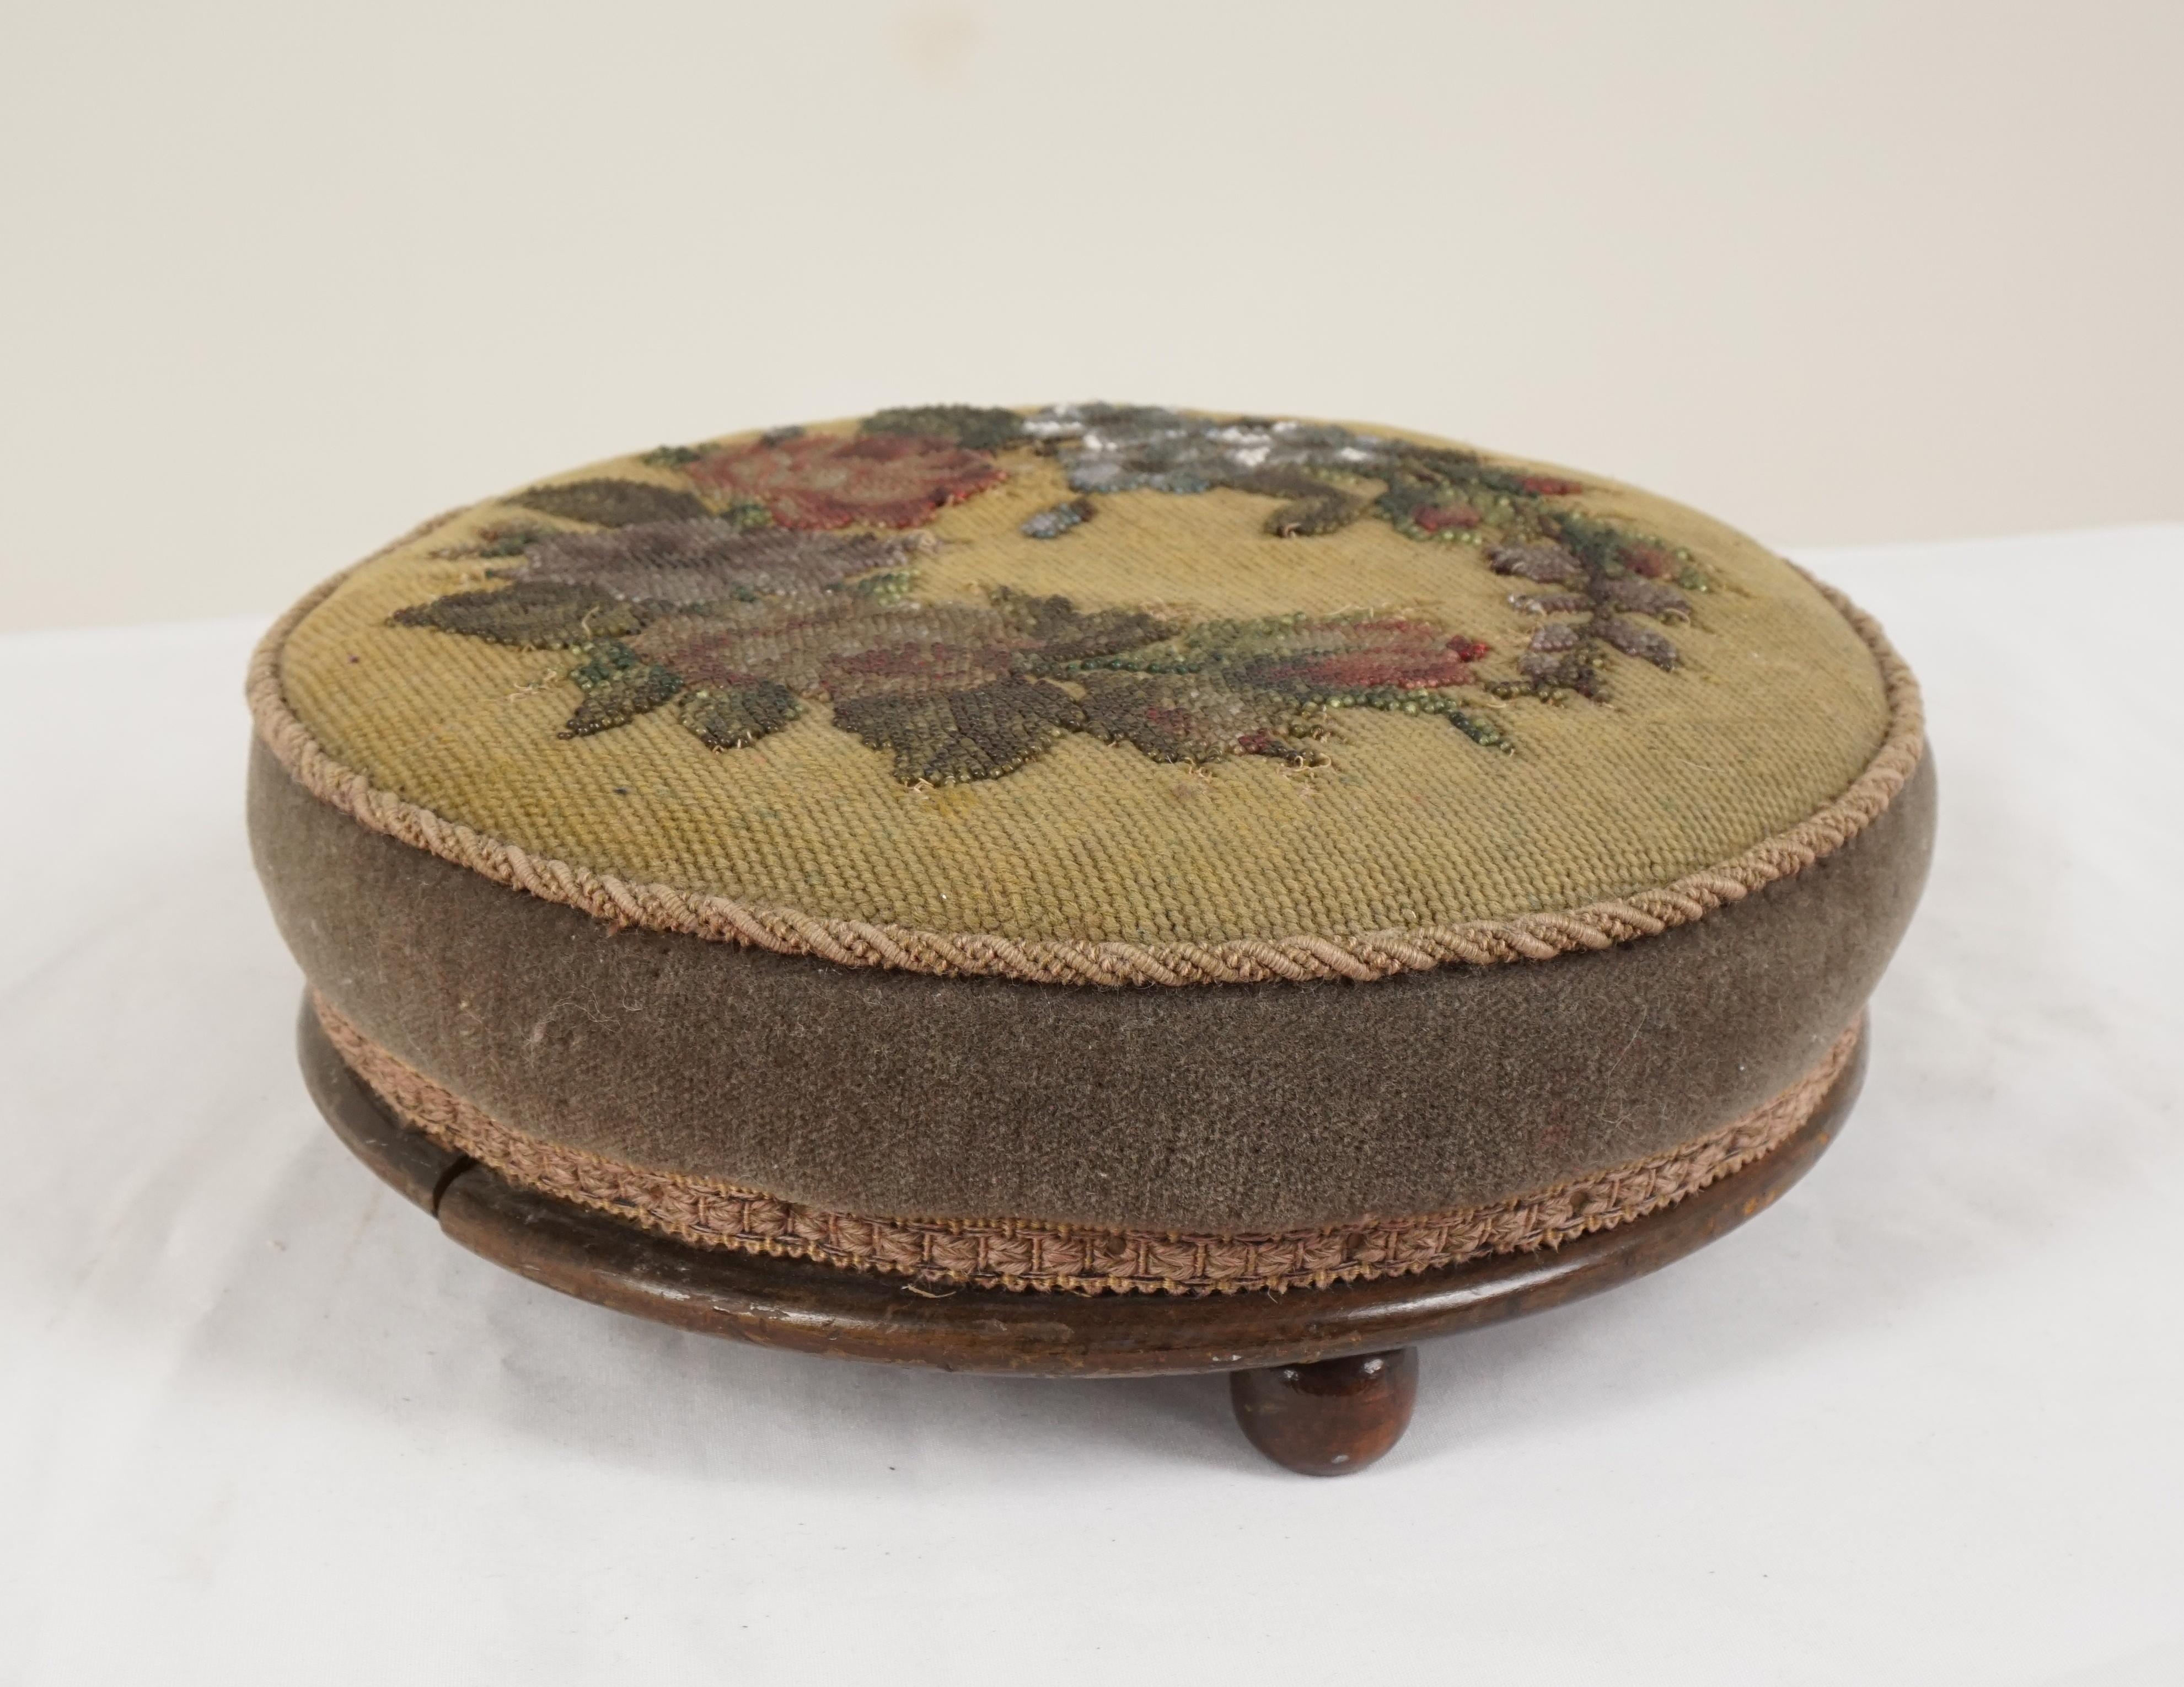 Antique Victorian walnut circular foot stool Scotland 1880, B106y

Scotland 1880
The cushioned top having beadwork floral design
Some loss of the beadwork
All standing on three wooden feet



Measures: 12